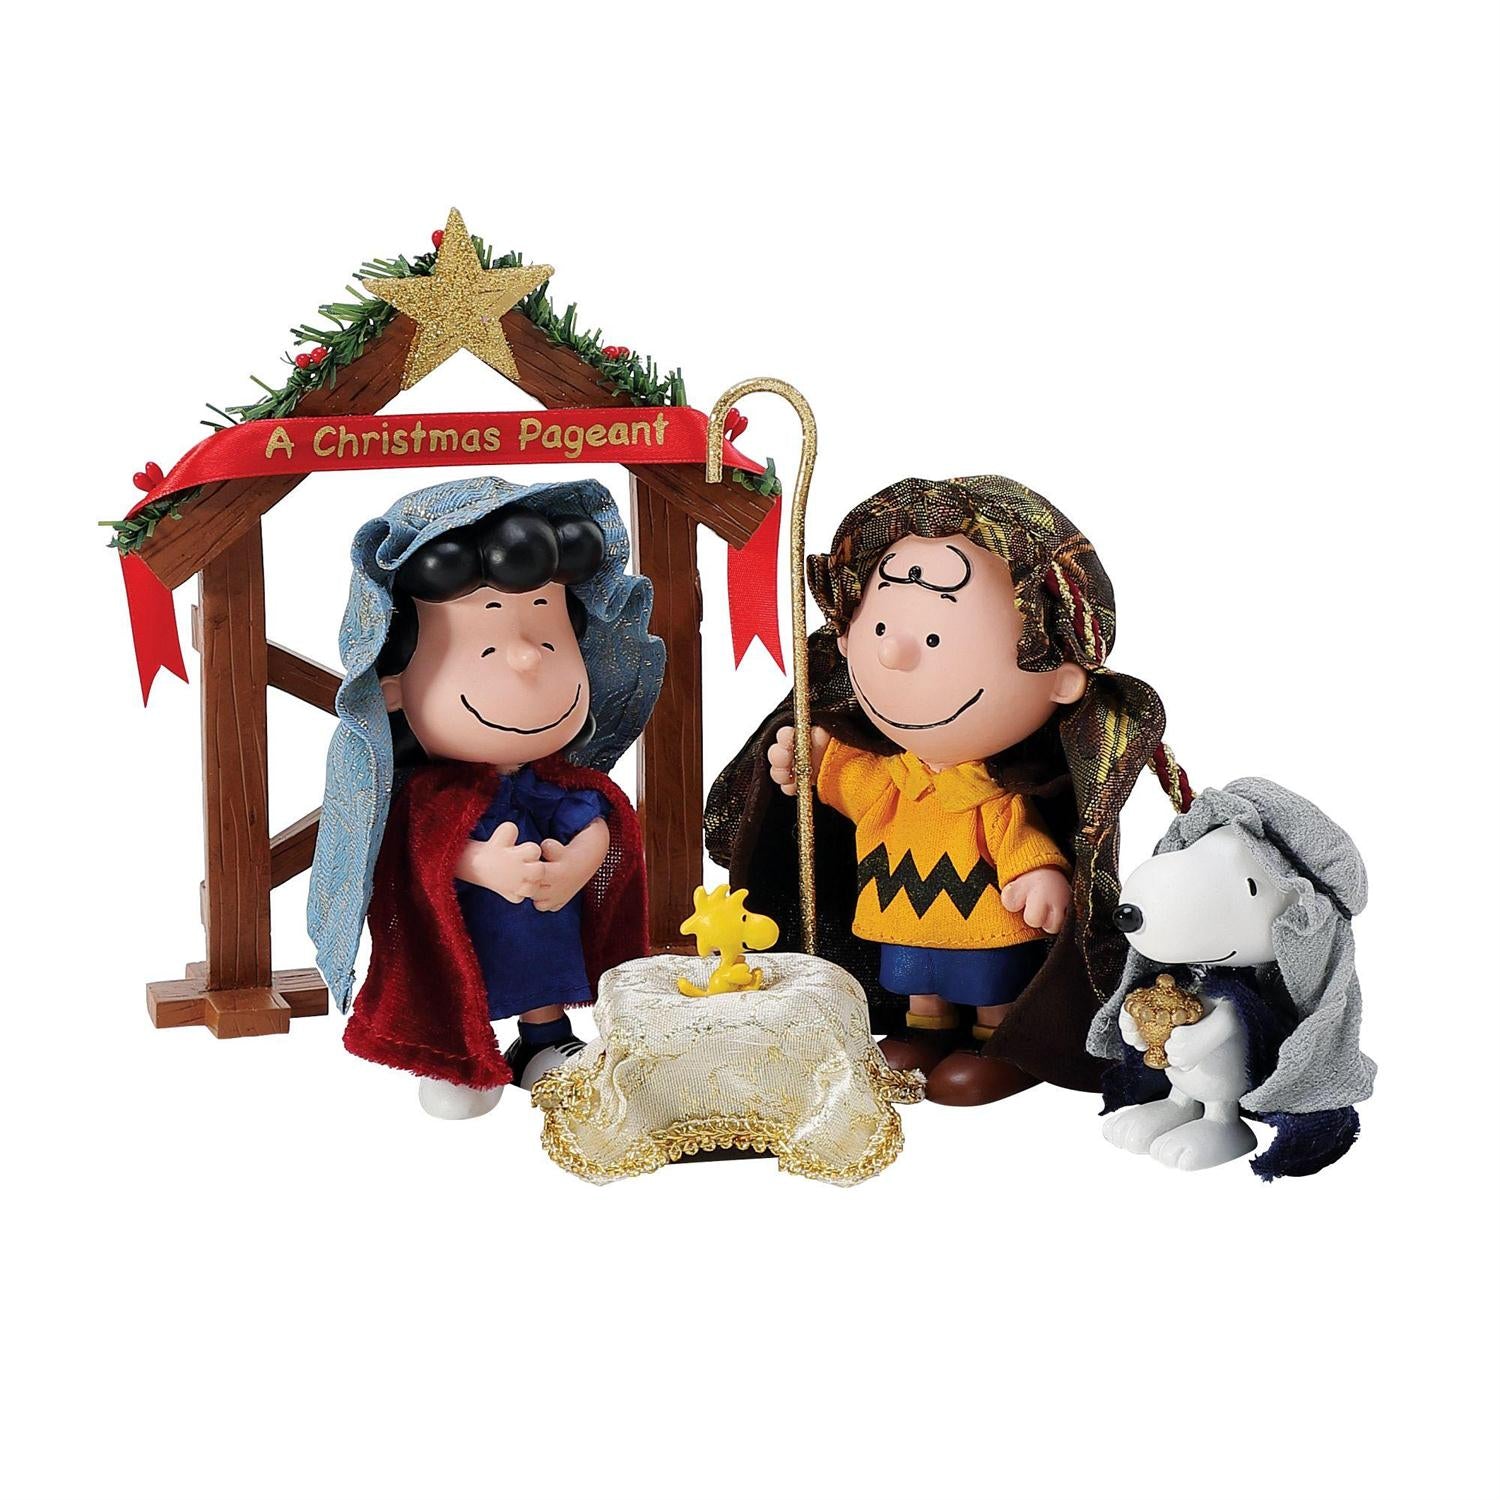 Christmas Pageant Charlie Brown, Lucy and Snoopy Figurine set